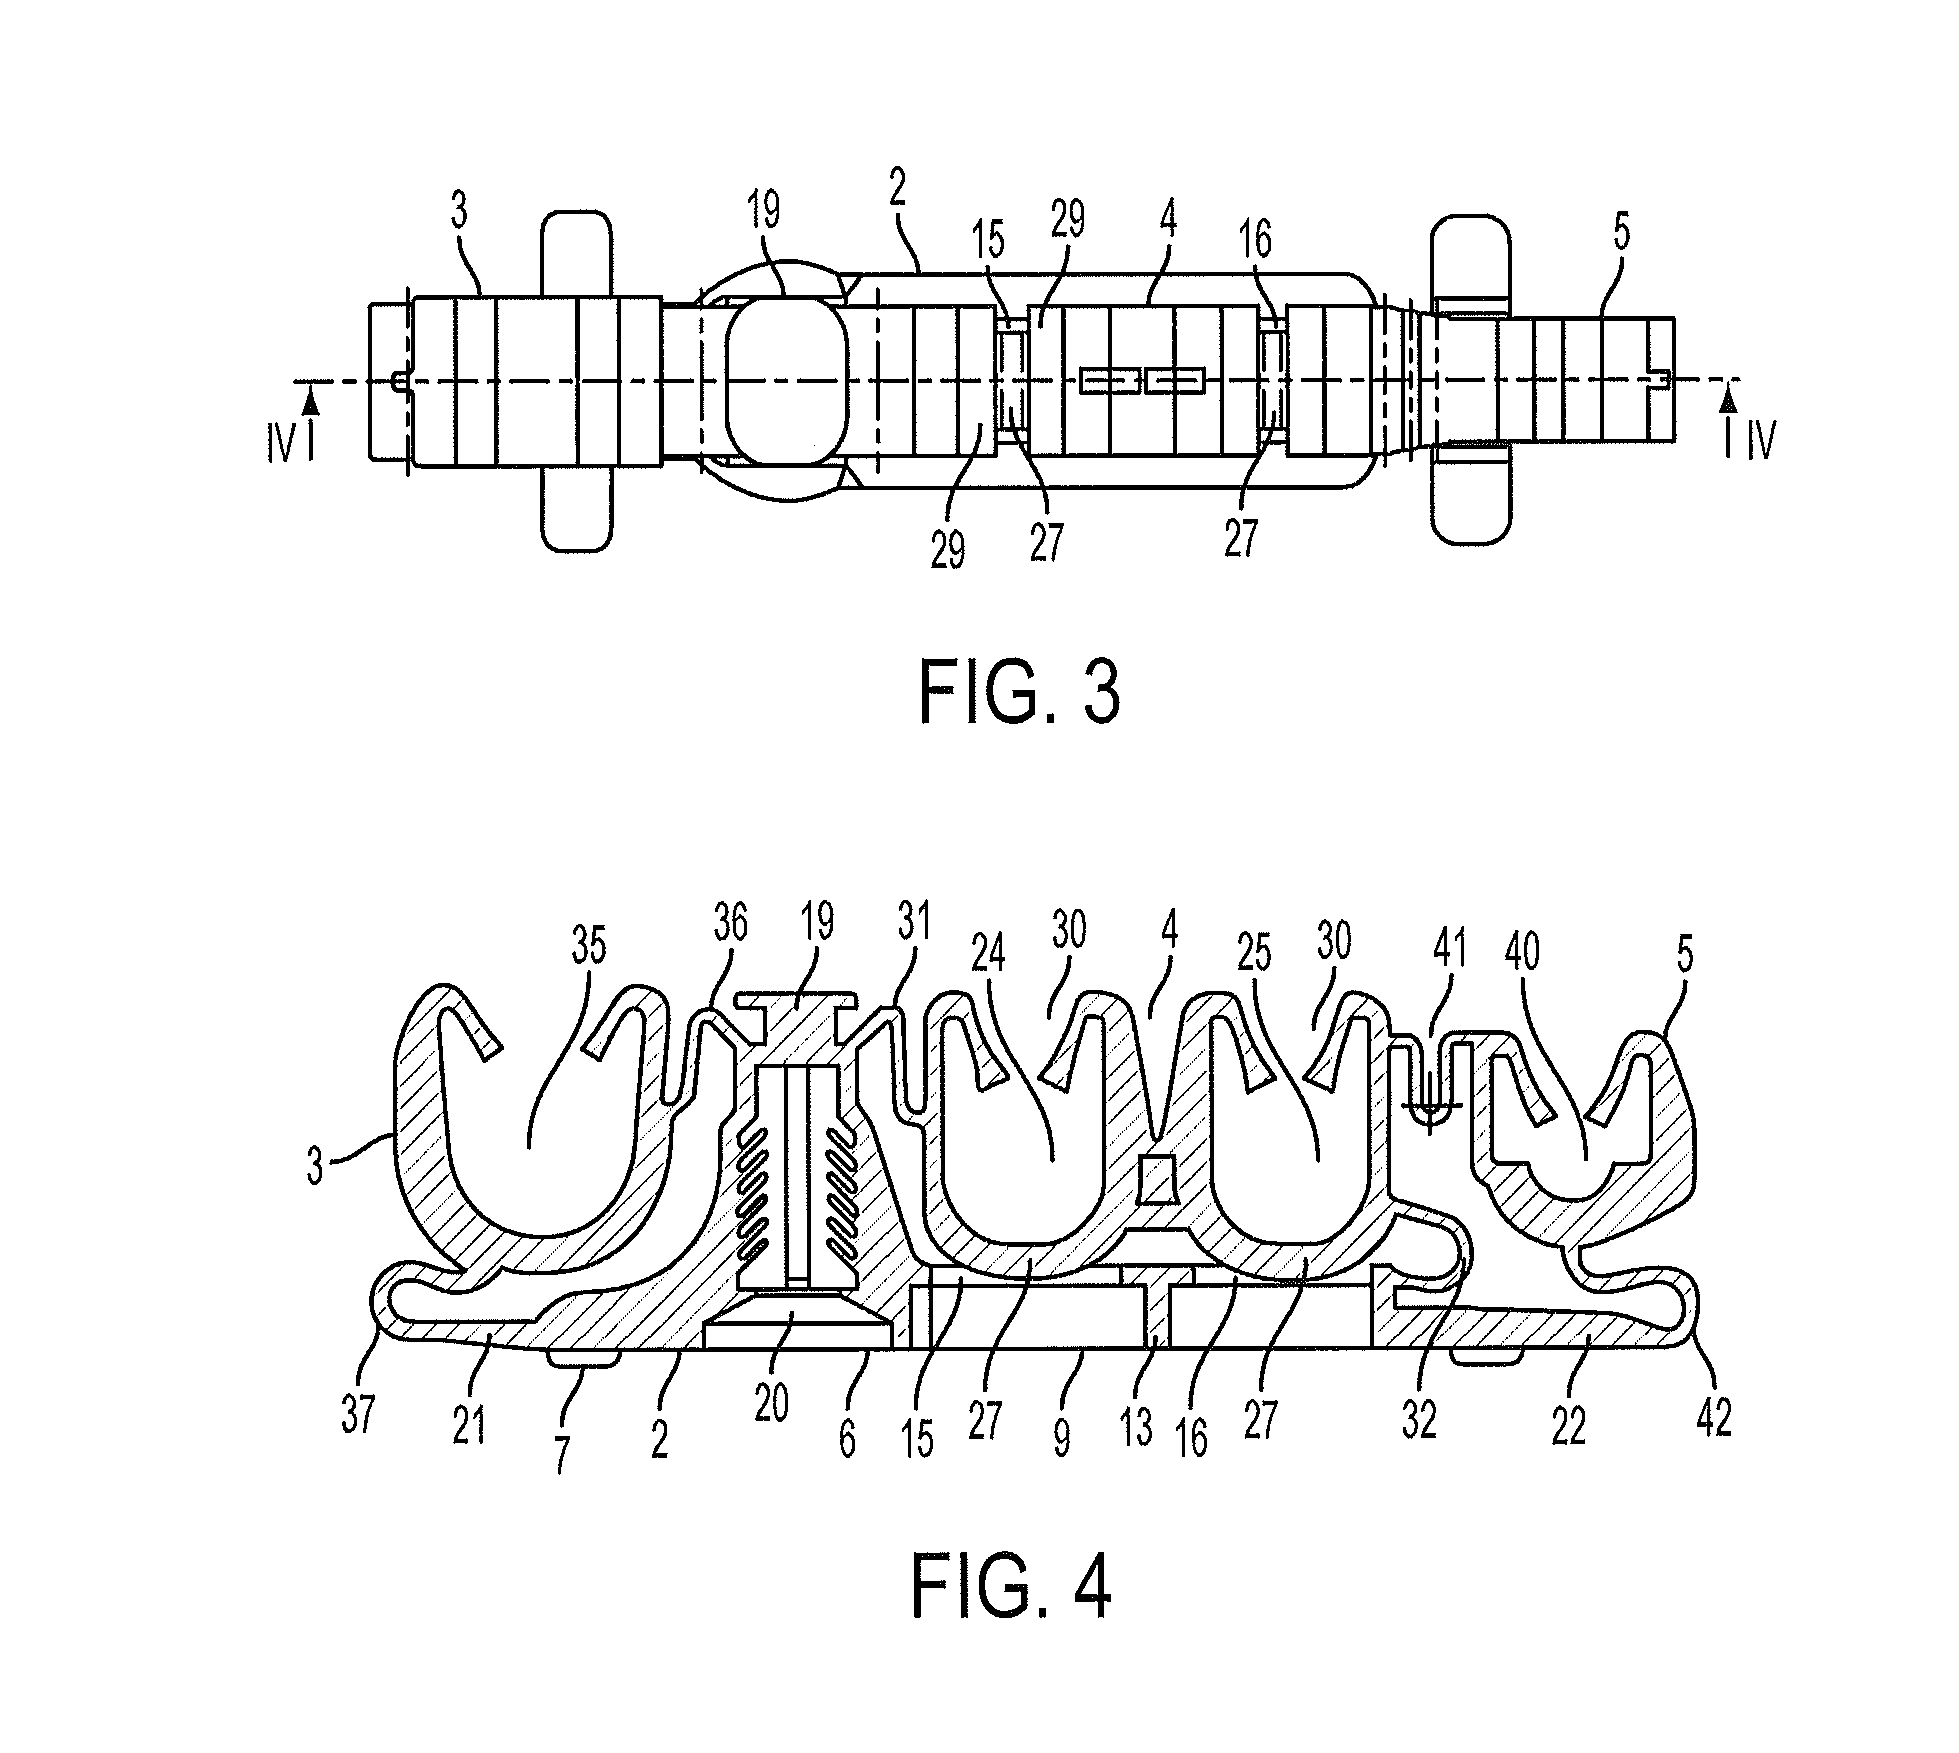 Plastic holder for Anti-vibration fastening an elongated object